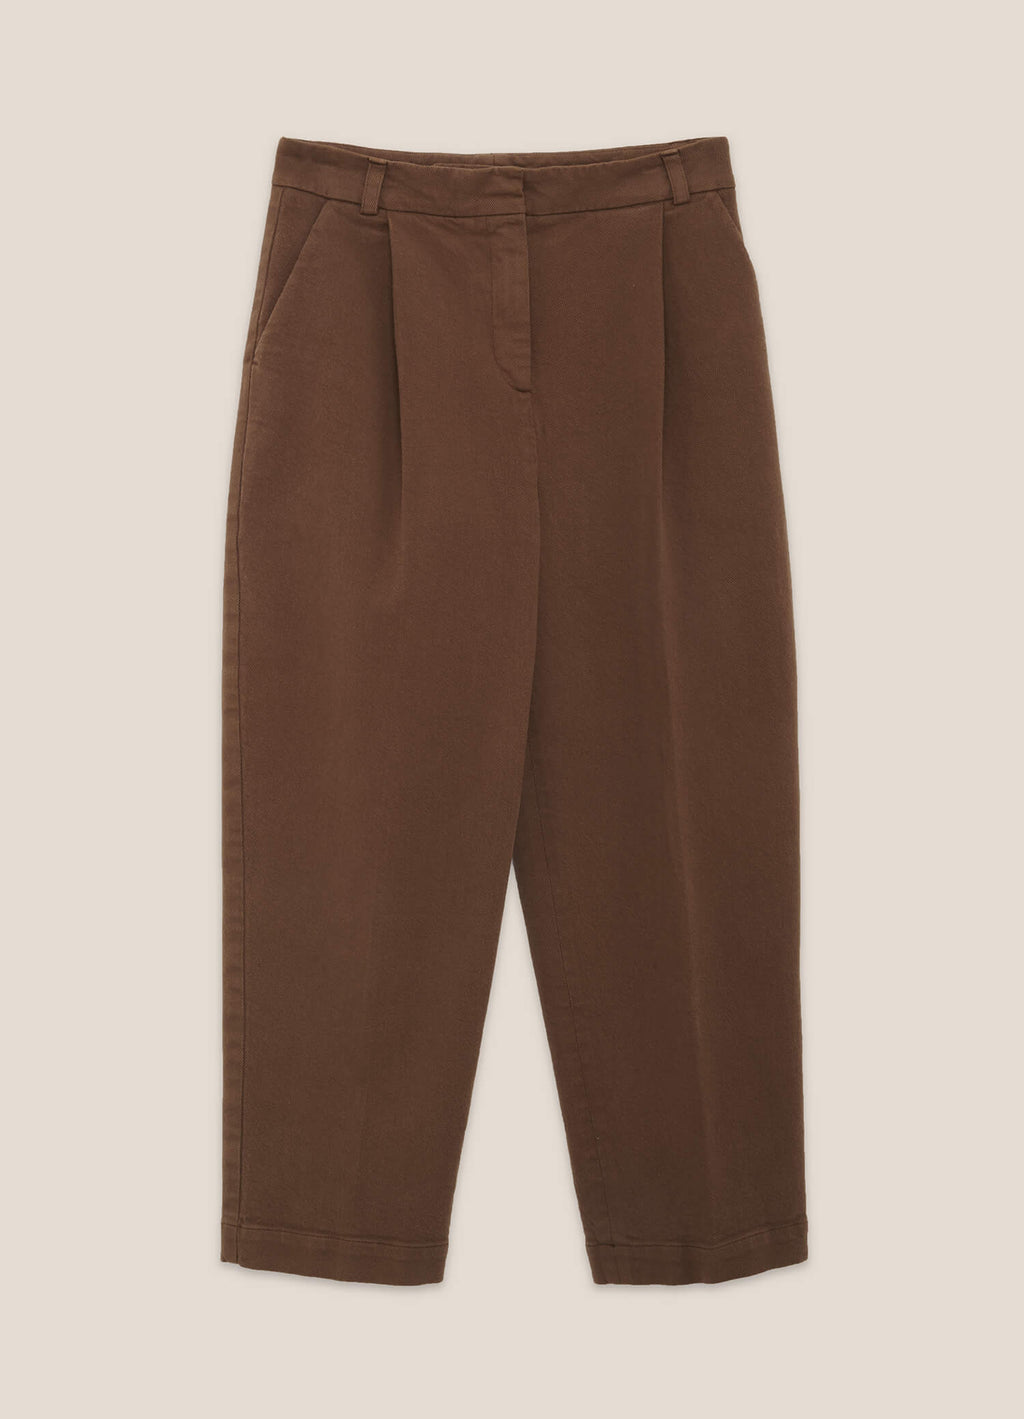 YMC Market Garment Dyed Cotton Twill Trousers - BROWN